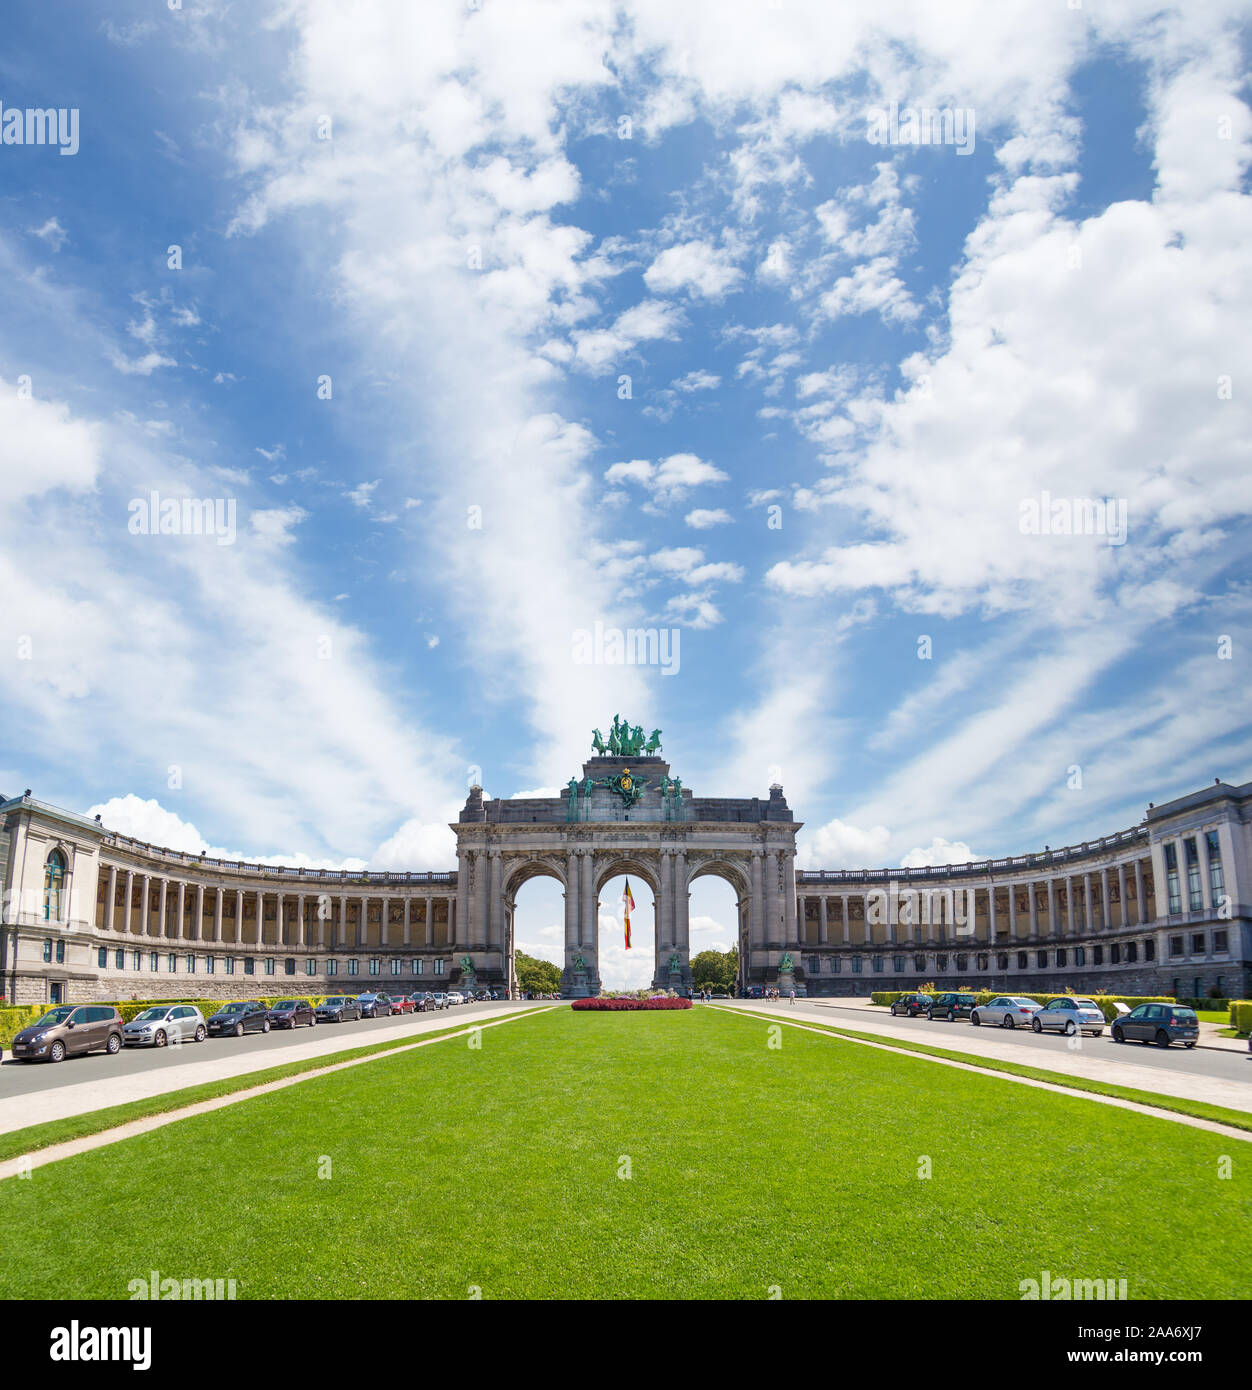 The Triumphal Arch or Arc de Triomphe in Brussels, Belgium Stock Photo